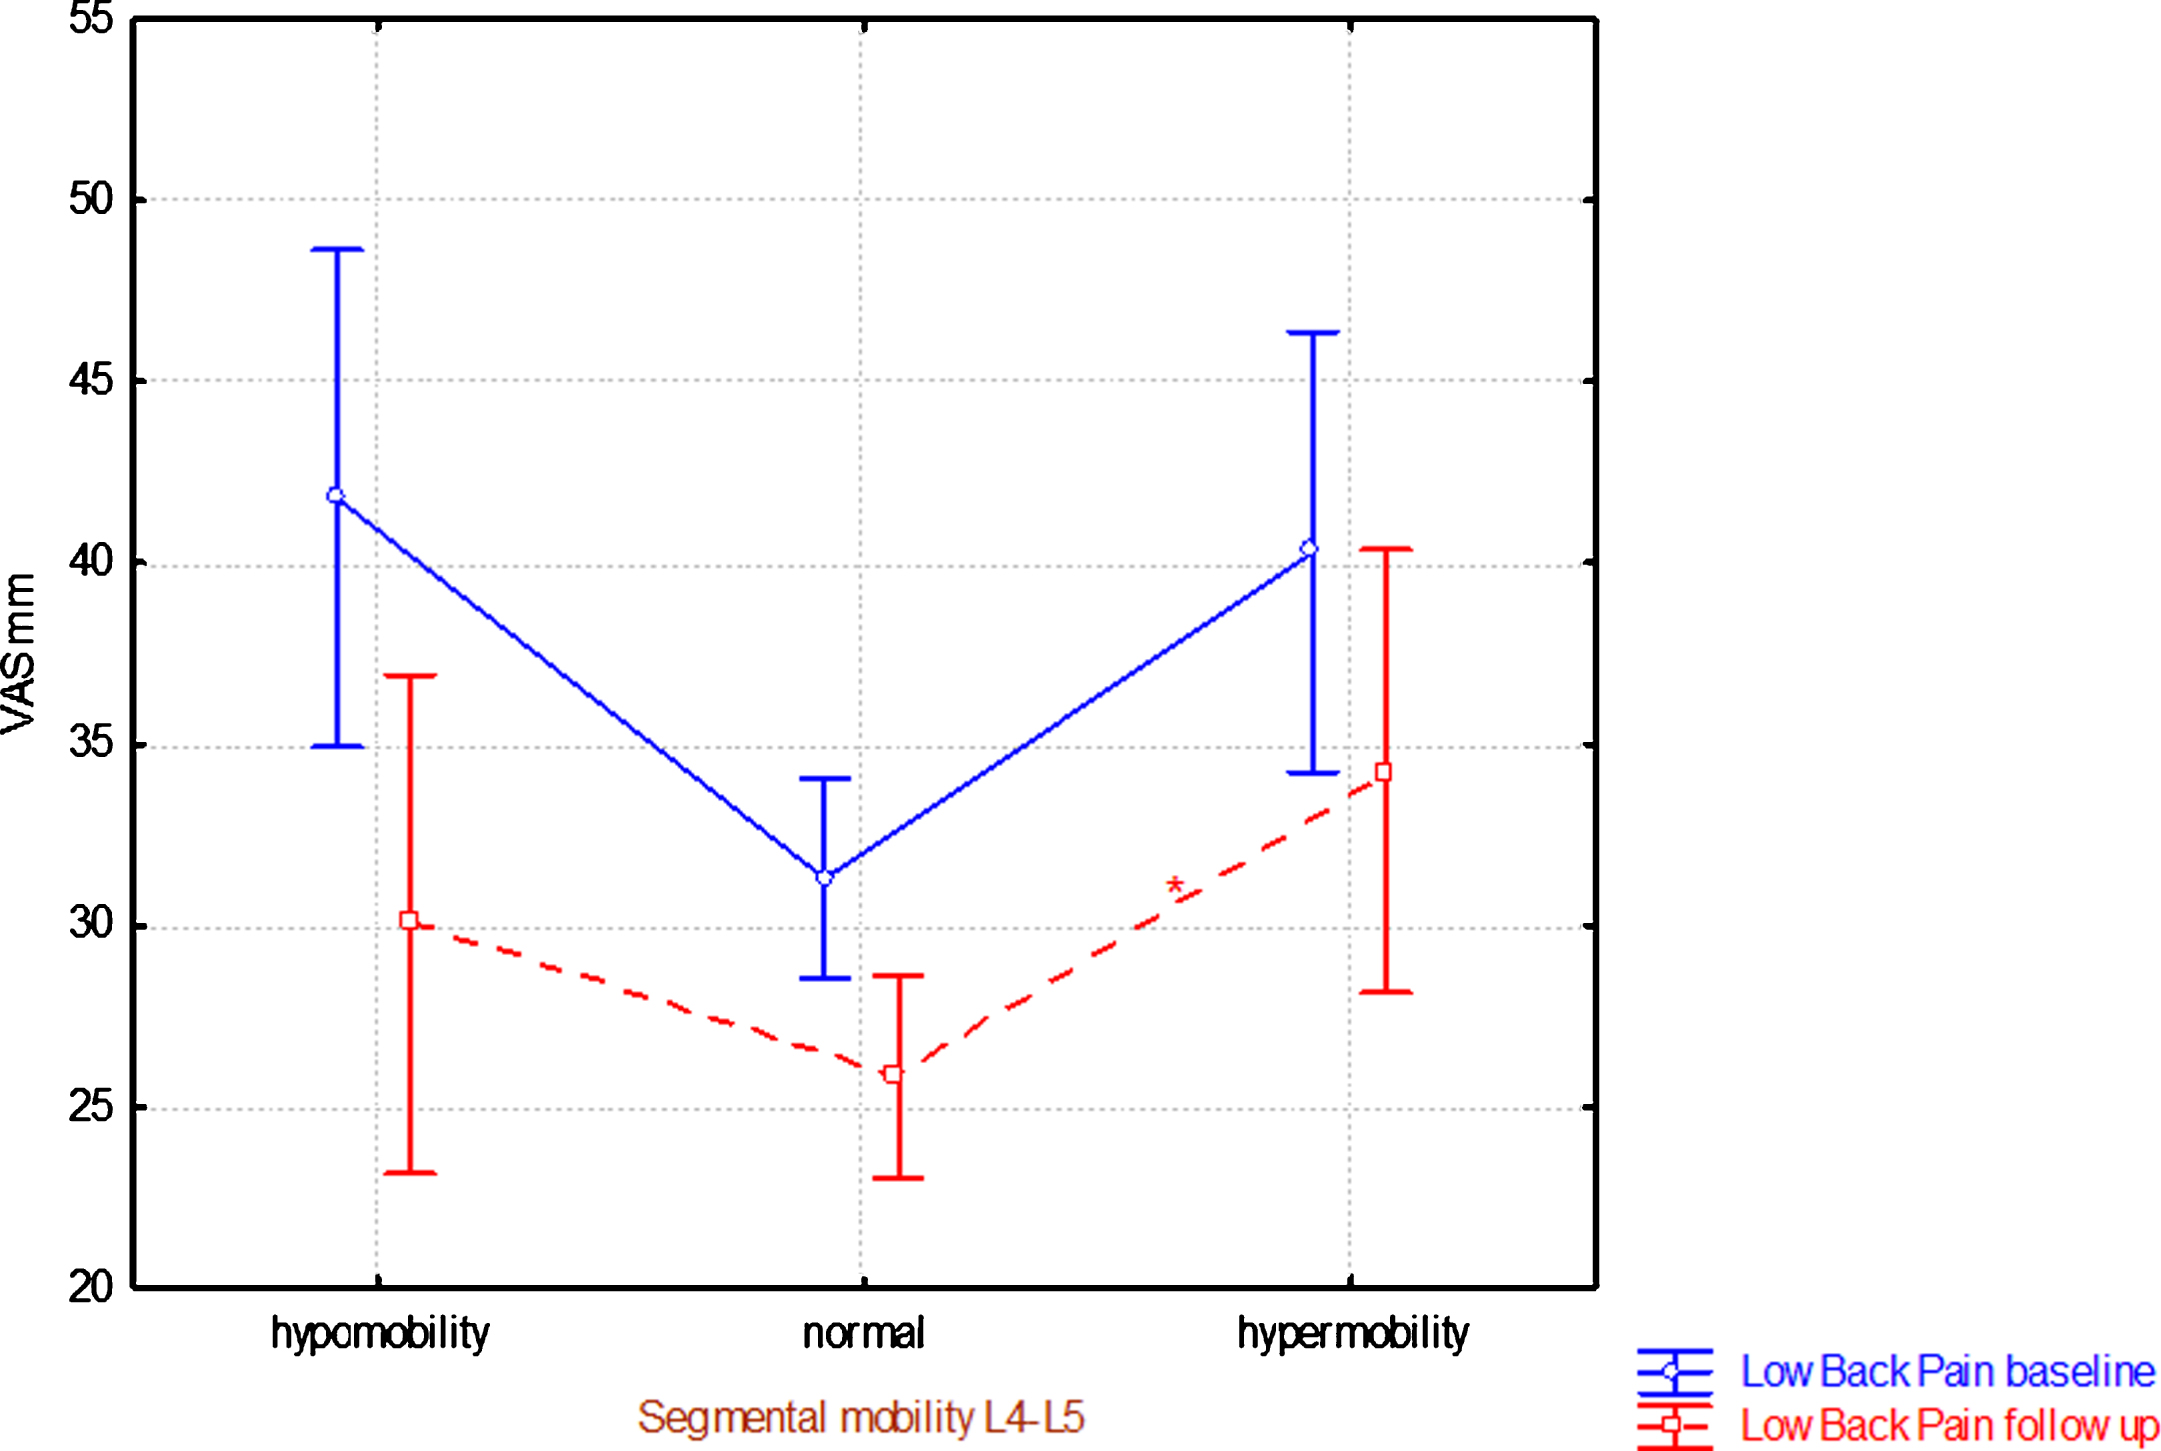 Segmental mobility at L4-L5 level at the clinical assessment at baseline versus low back pain intensity (mean ± 95% CI) at baseline and at eight-year follow-up. *denotes significant difference in relation to normal segmental mobility.